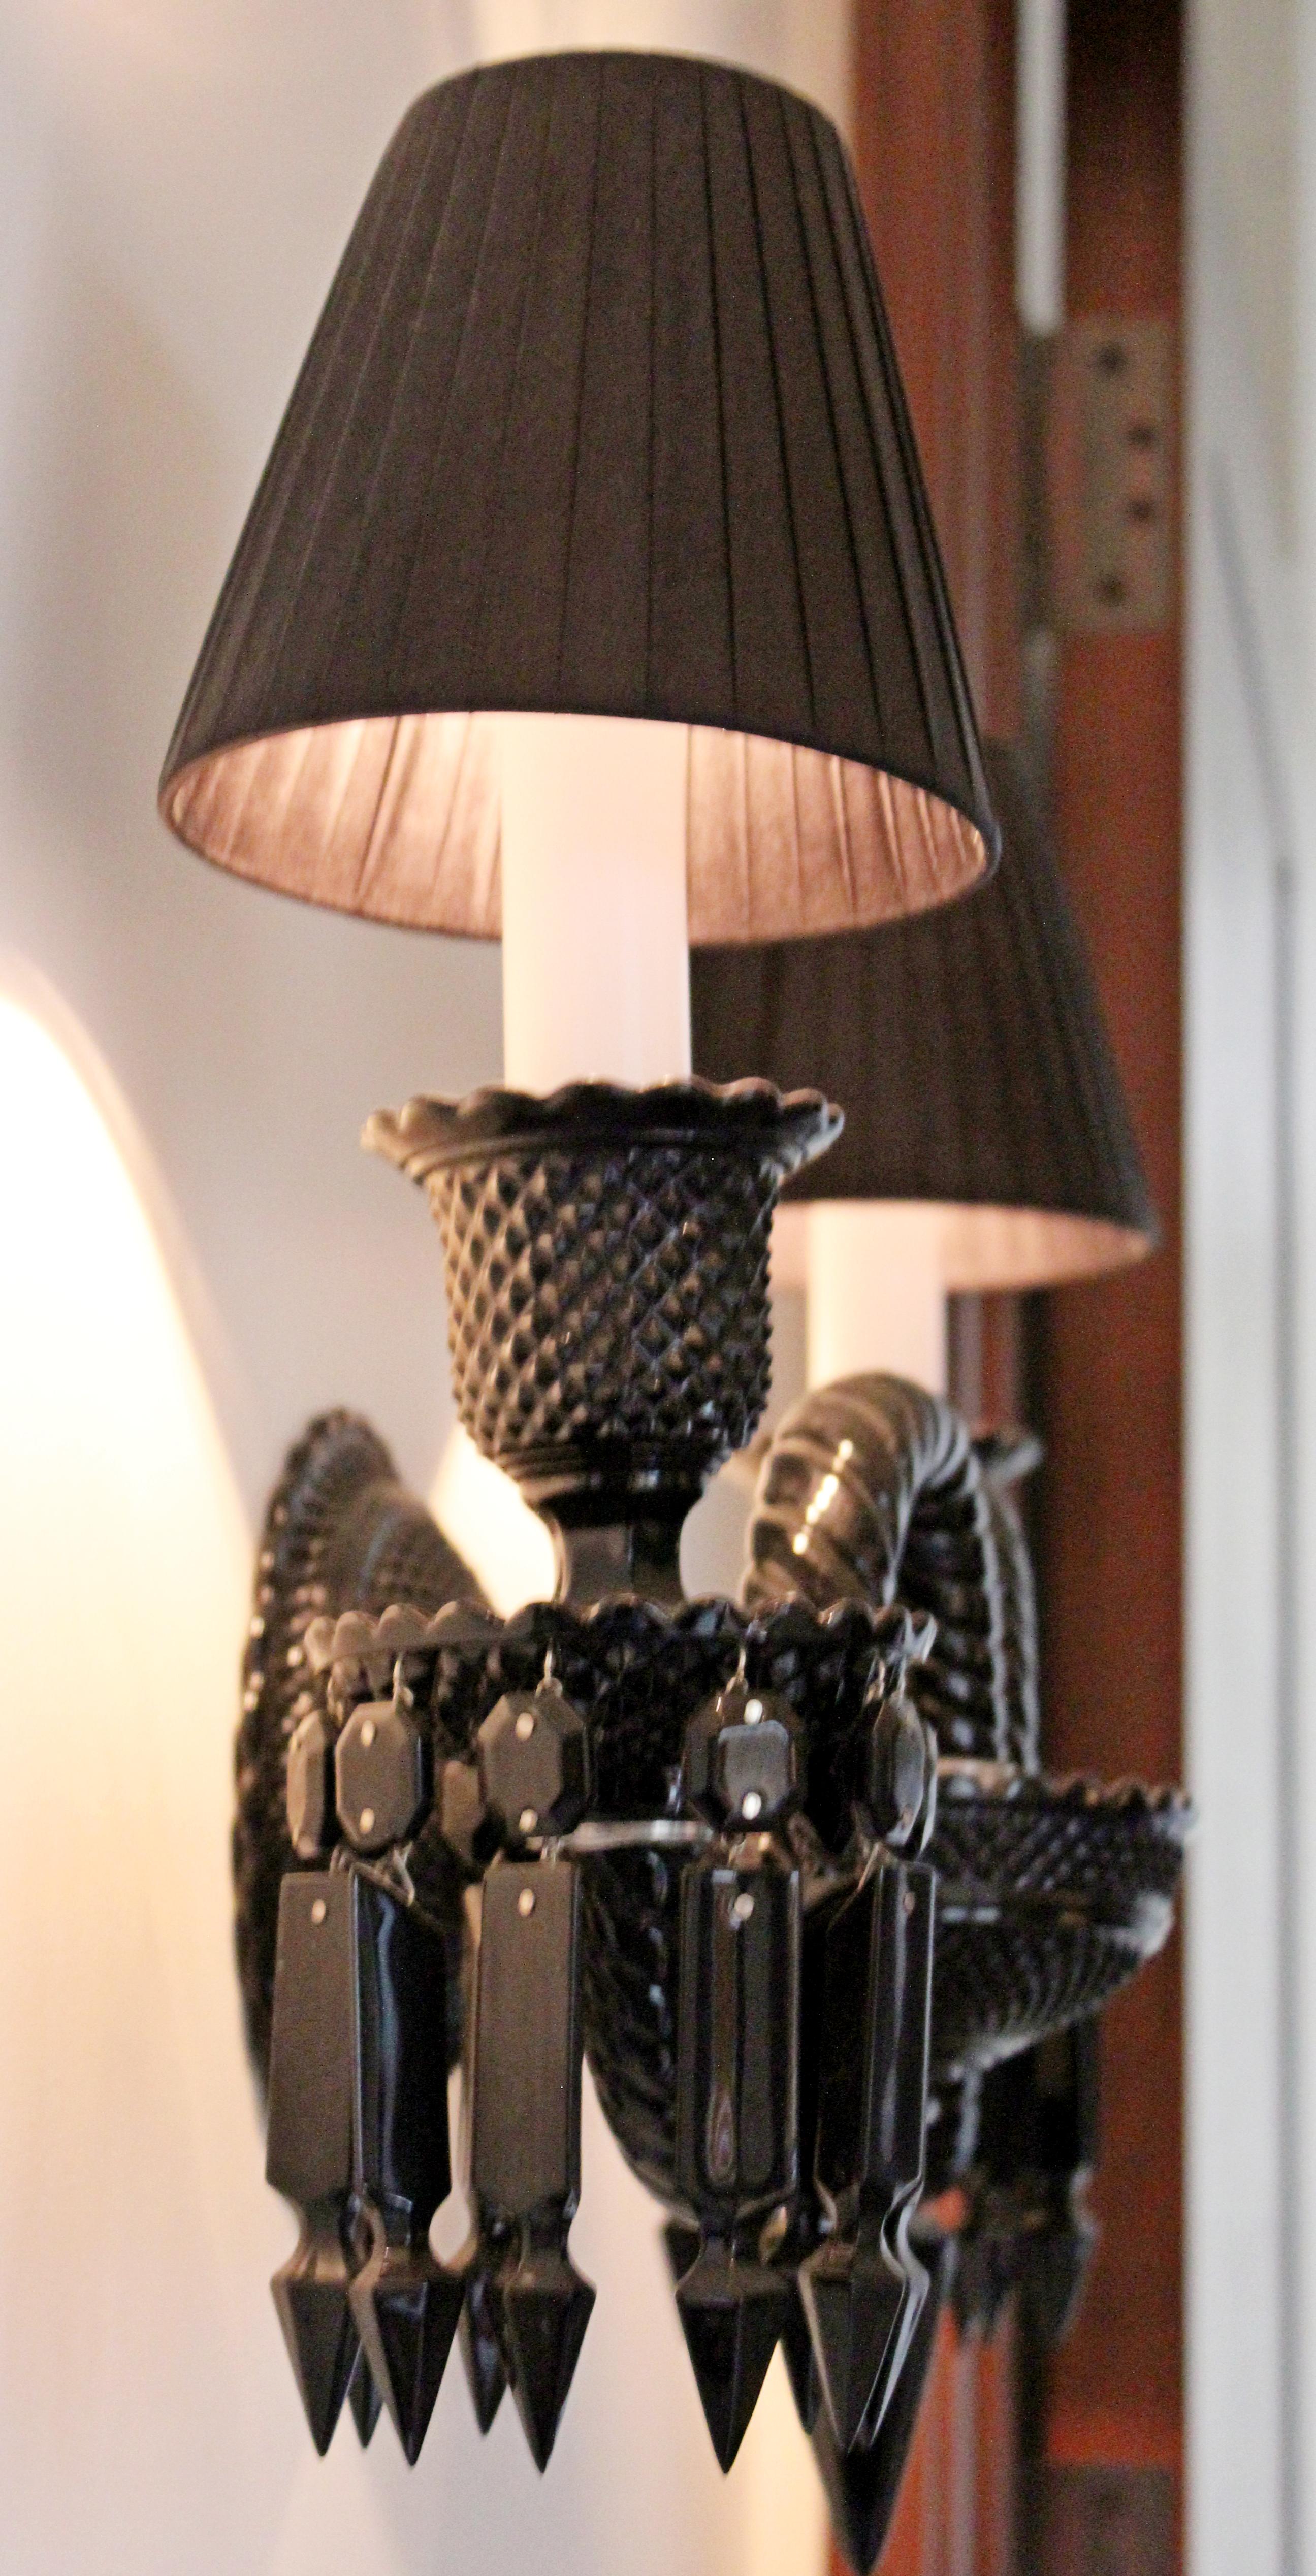 French Contemporary Baccarat Zenith Black Crystal Noir Wall Sconce by Philippe Starck